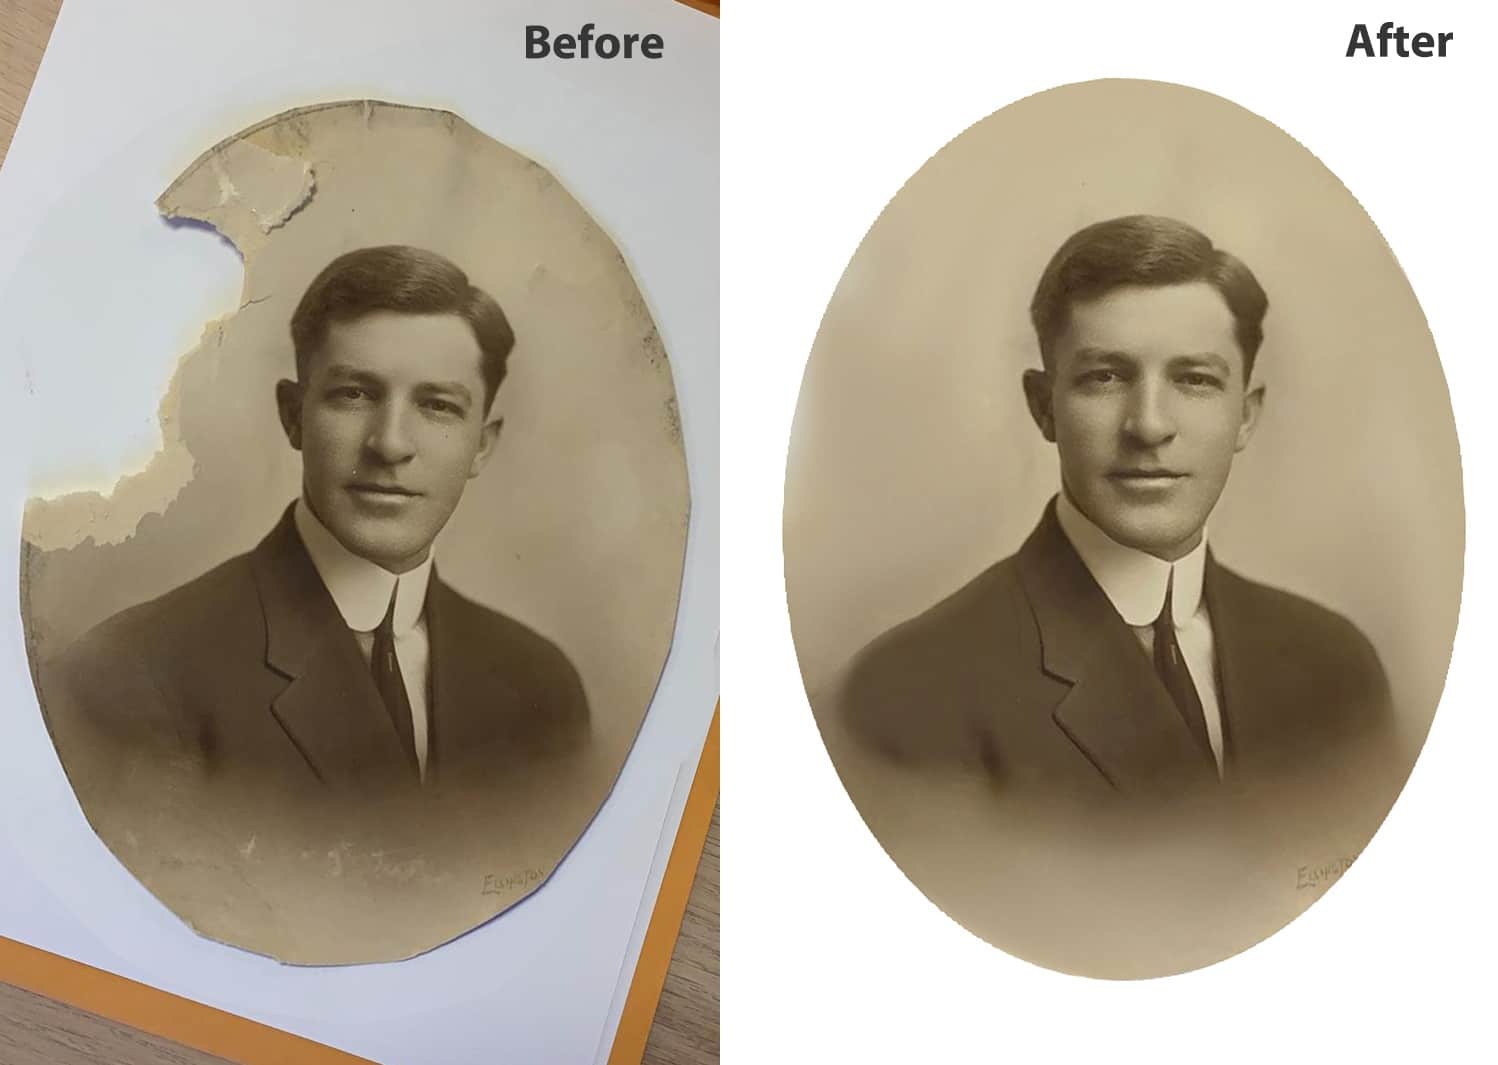 restored photo of man in suit